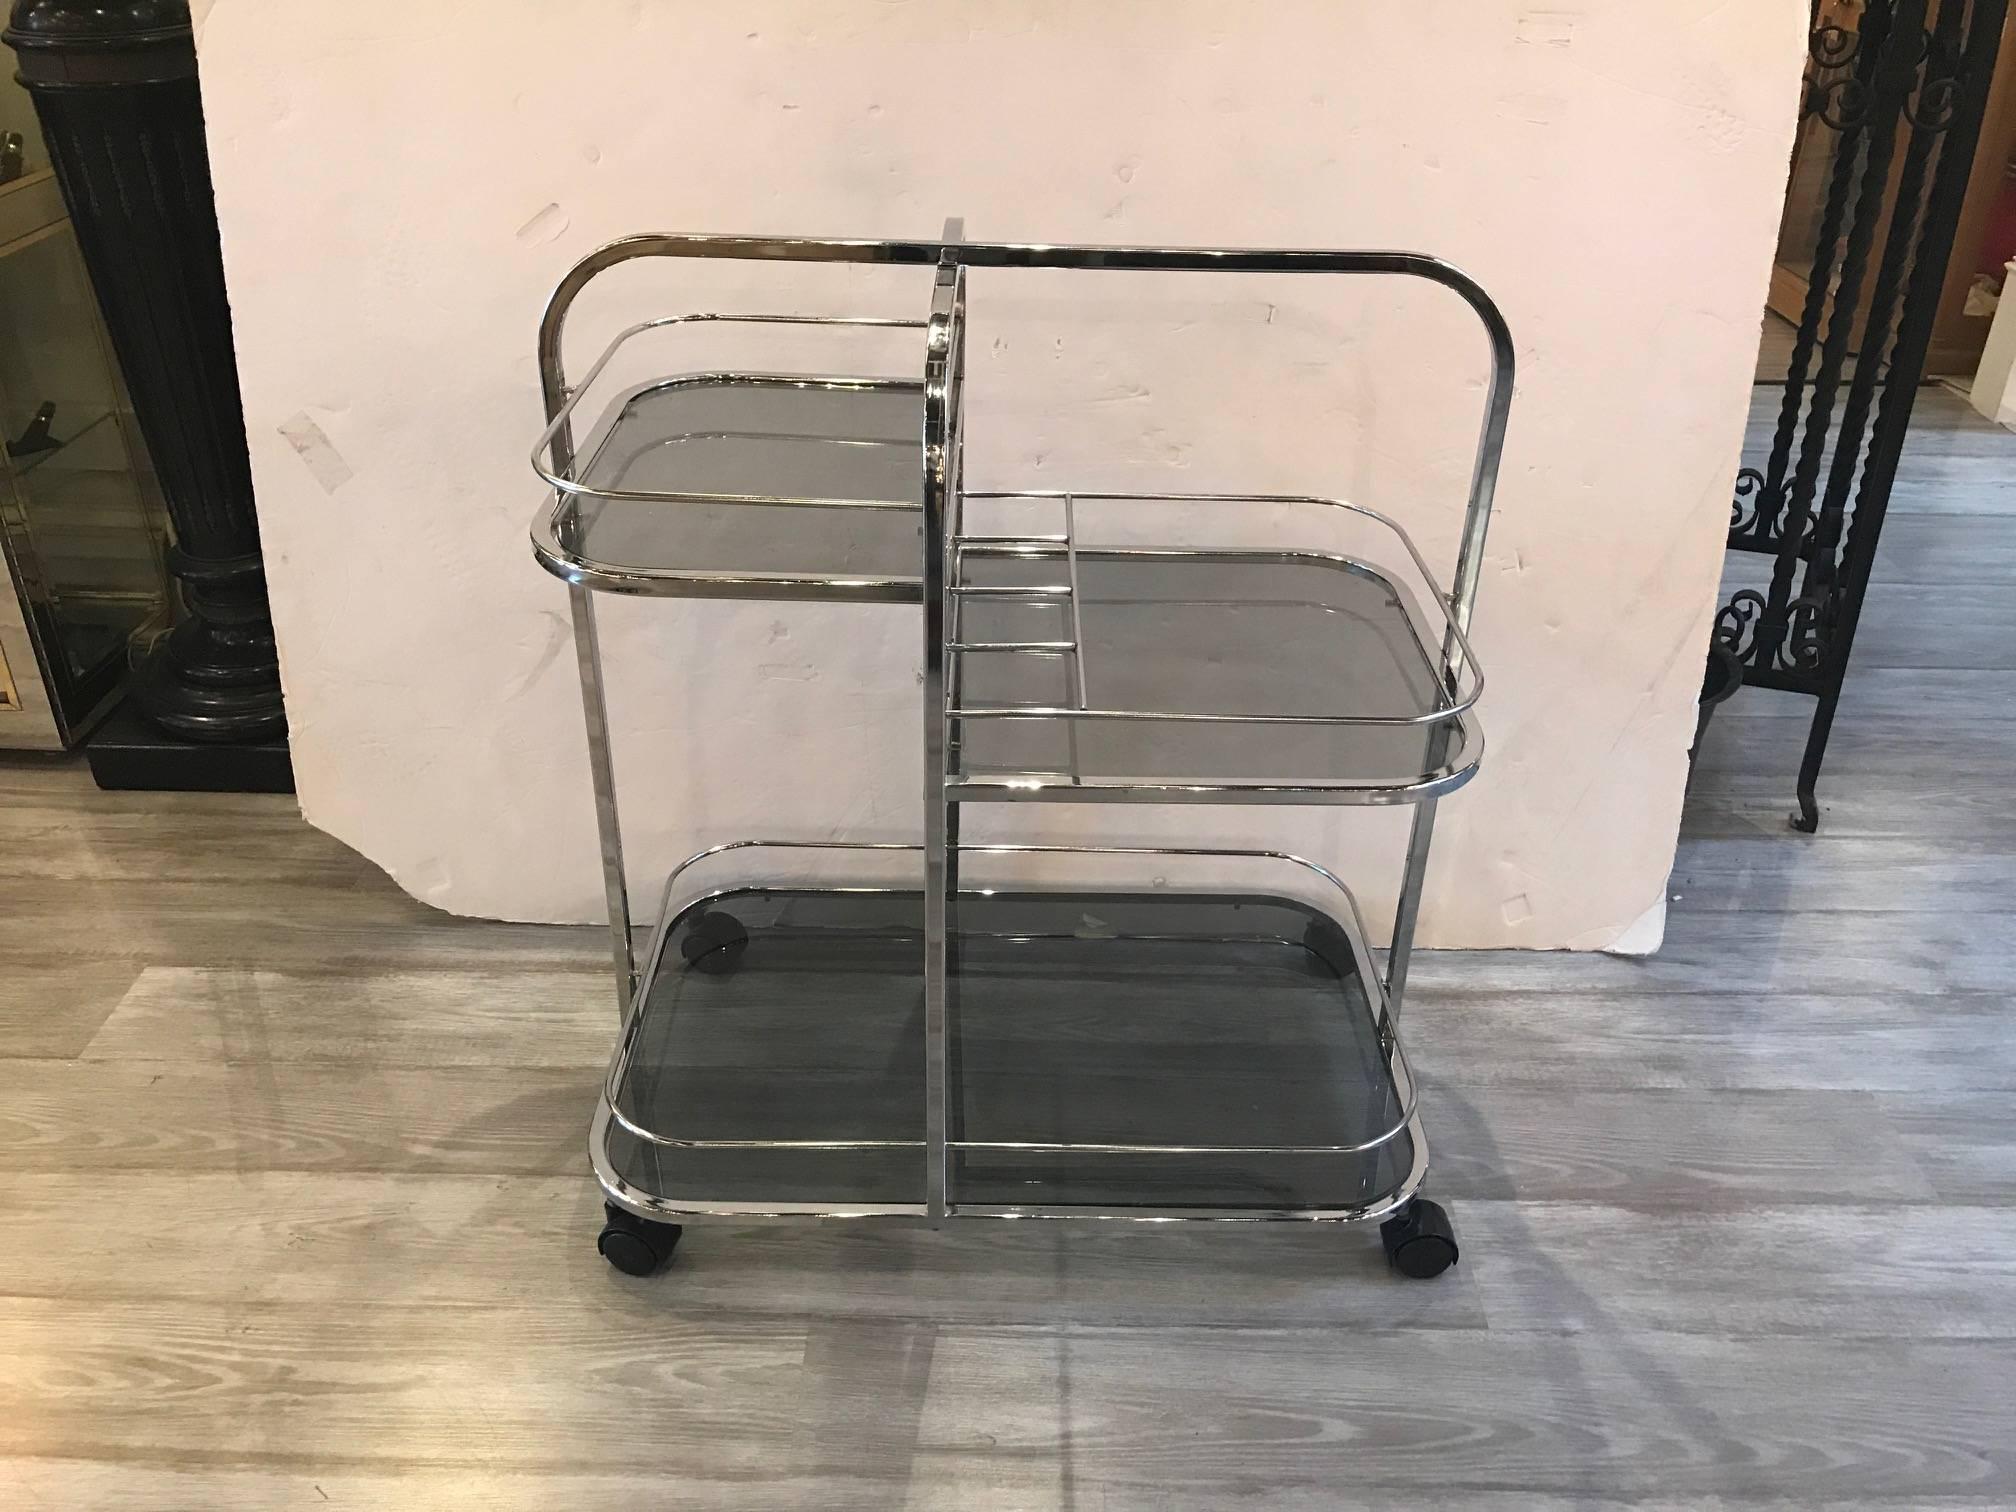 Mid-Century Modern chrome and smoked glass beverage or dessert cart. The asymmetrical upper shelf with single lower shelf in a smoked glass. The Chrome body in very good condition resting of four castors.